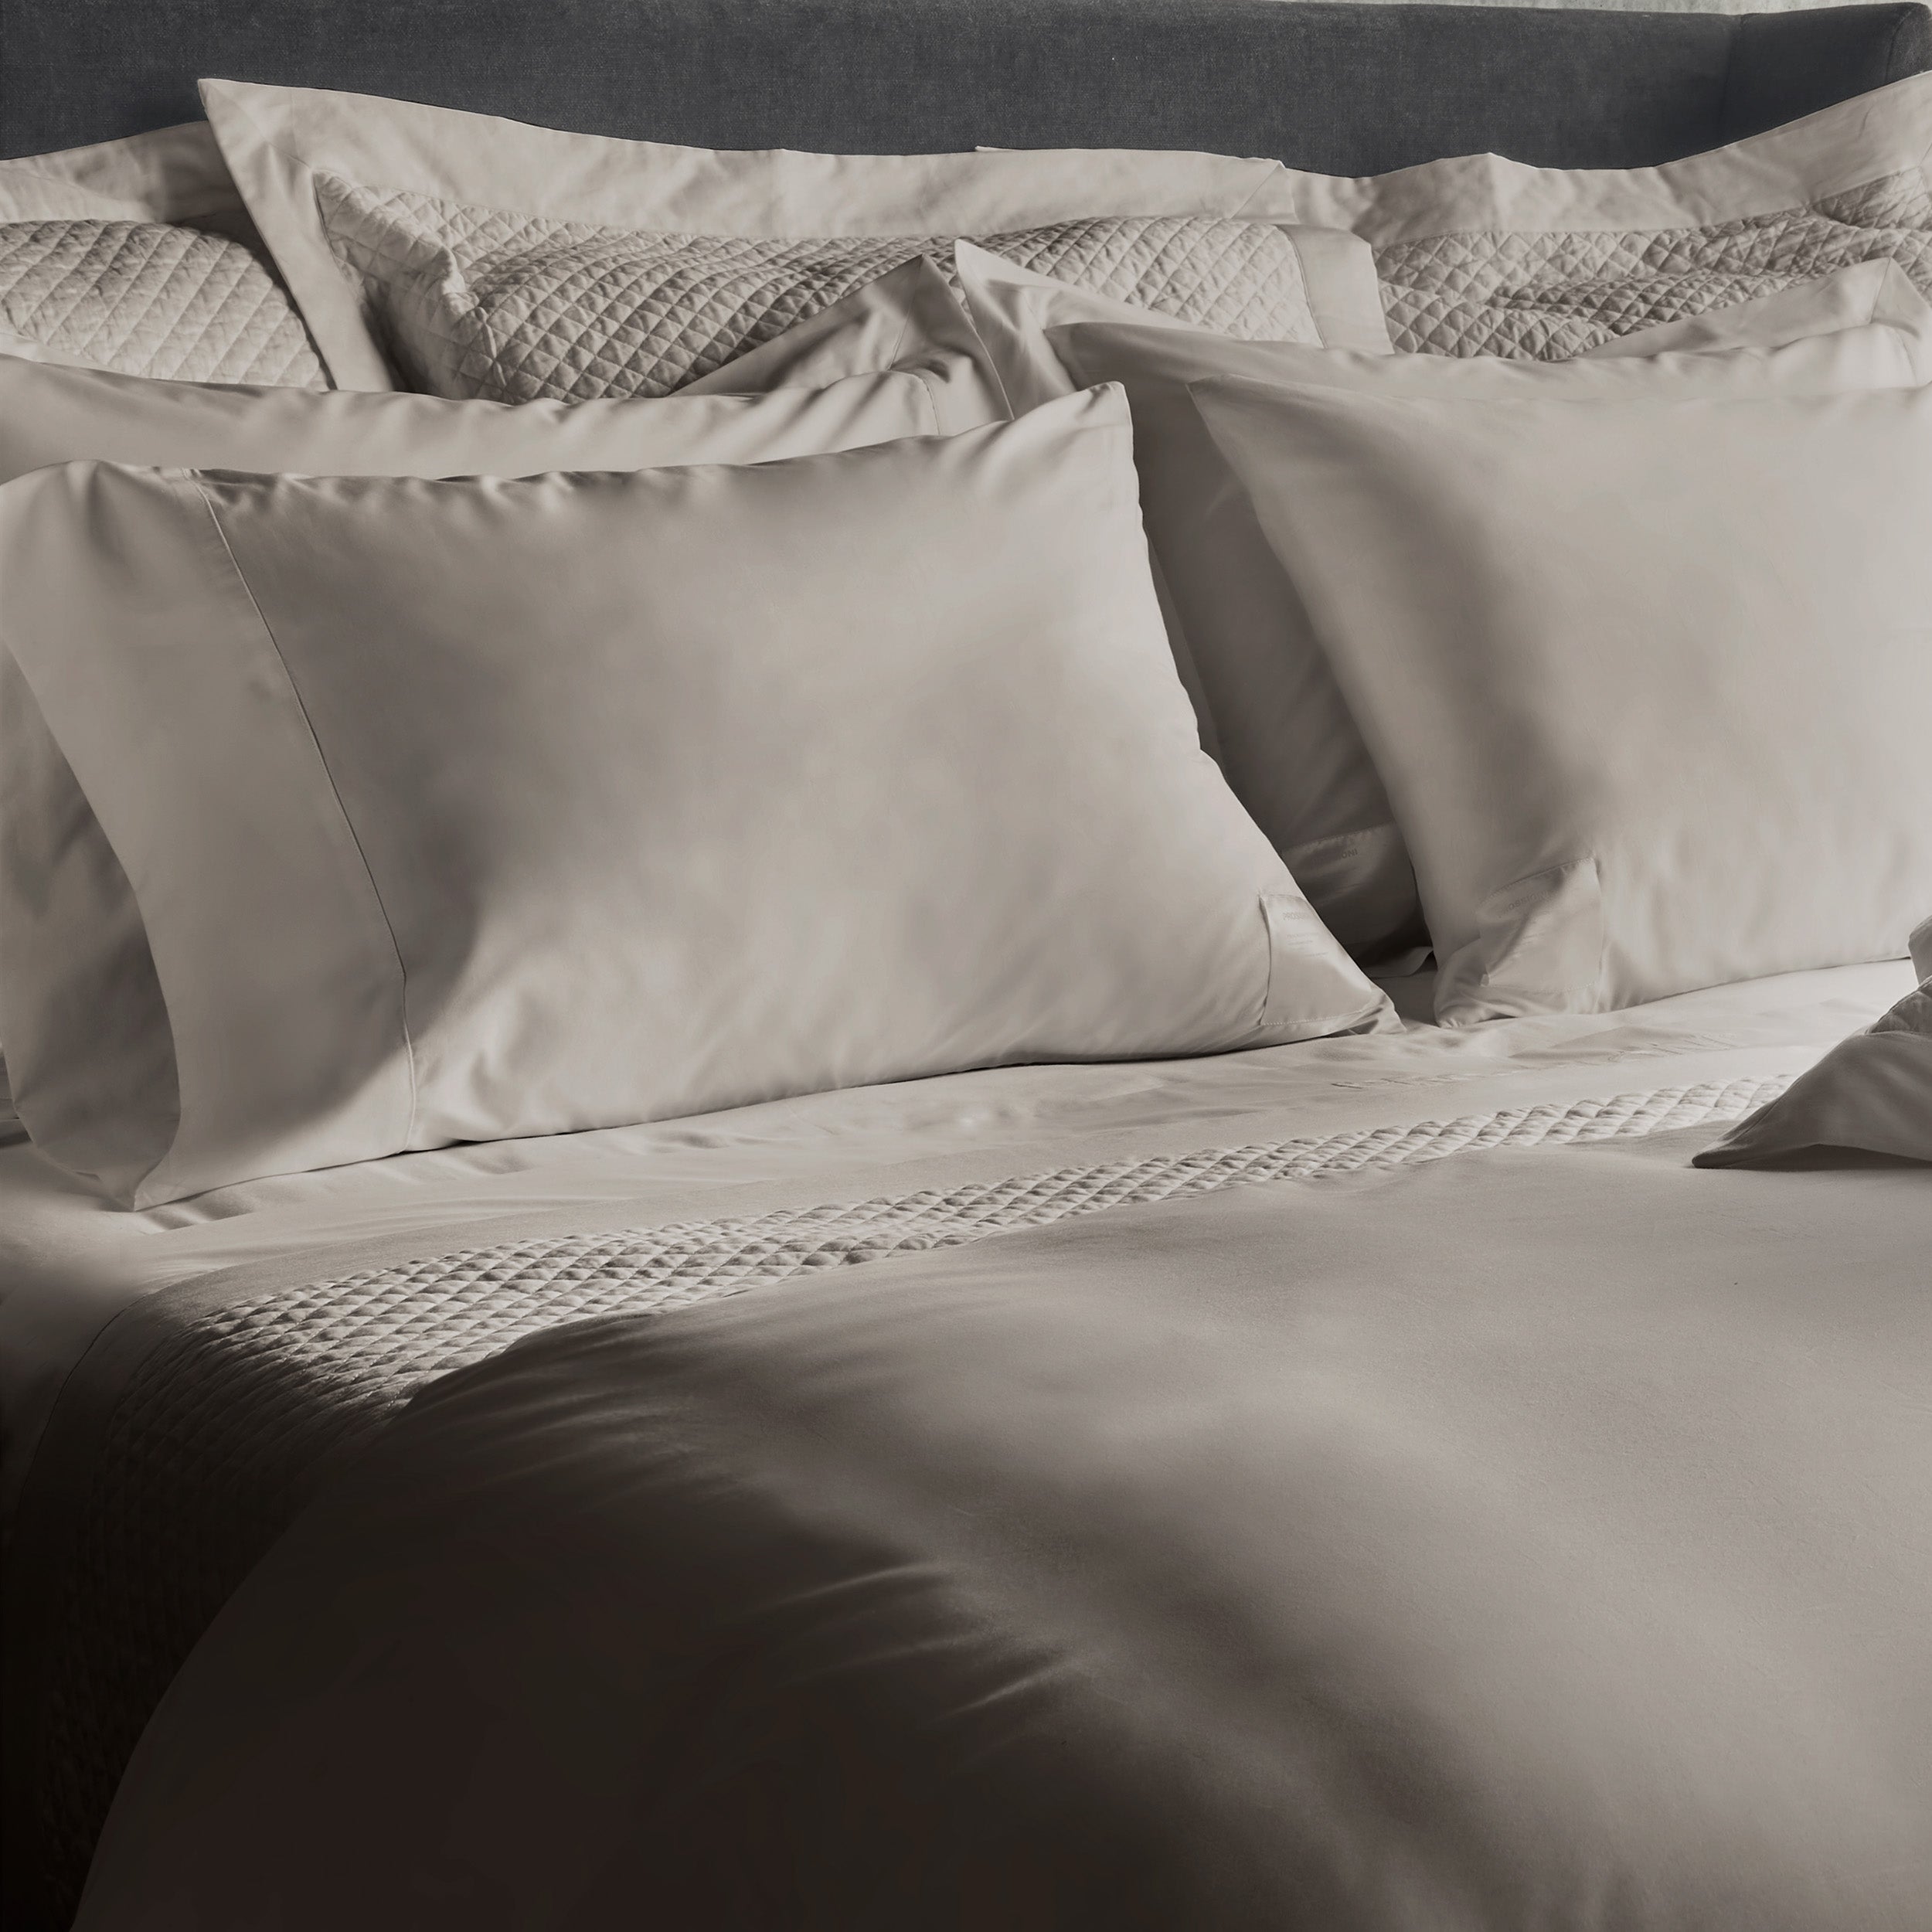 Boutique Hotel Sateen / Twin / Moscato Beige, Boutique Hotel Sateen / Twin XL / Moscato Beige, Boutique Hotel Sateen / Full / Moscato Beige, Boutique Hotel Sateen / Queen / Moscato Beige, Boutique Hotel Sateen / King / Moscato Beige, Boutique Hotel Sateen / Cal King / Moscato Beige, Boutique Hotel Sateen / Split King / Moscato Beige, Boutique Hotel Sateen / King w/st pillowcases / Moscato Beige